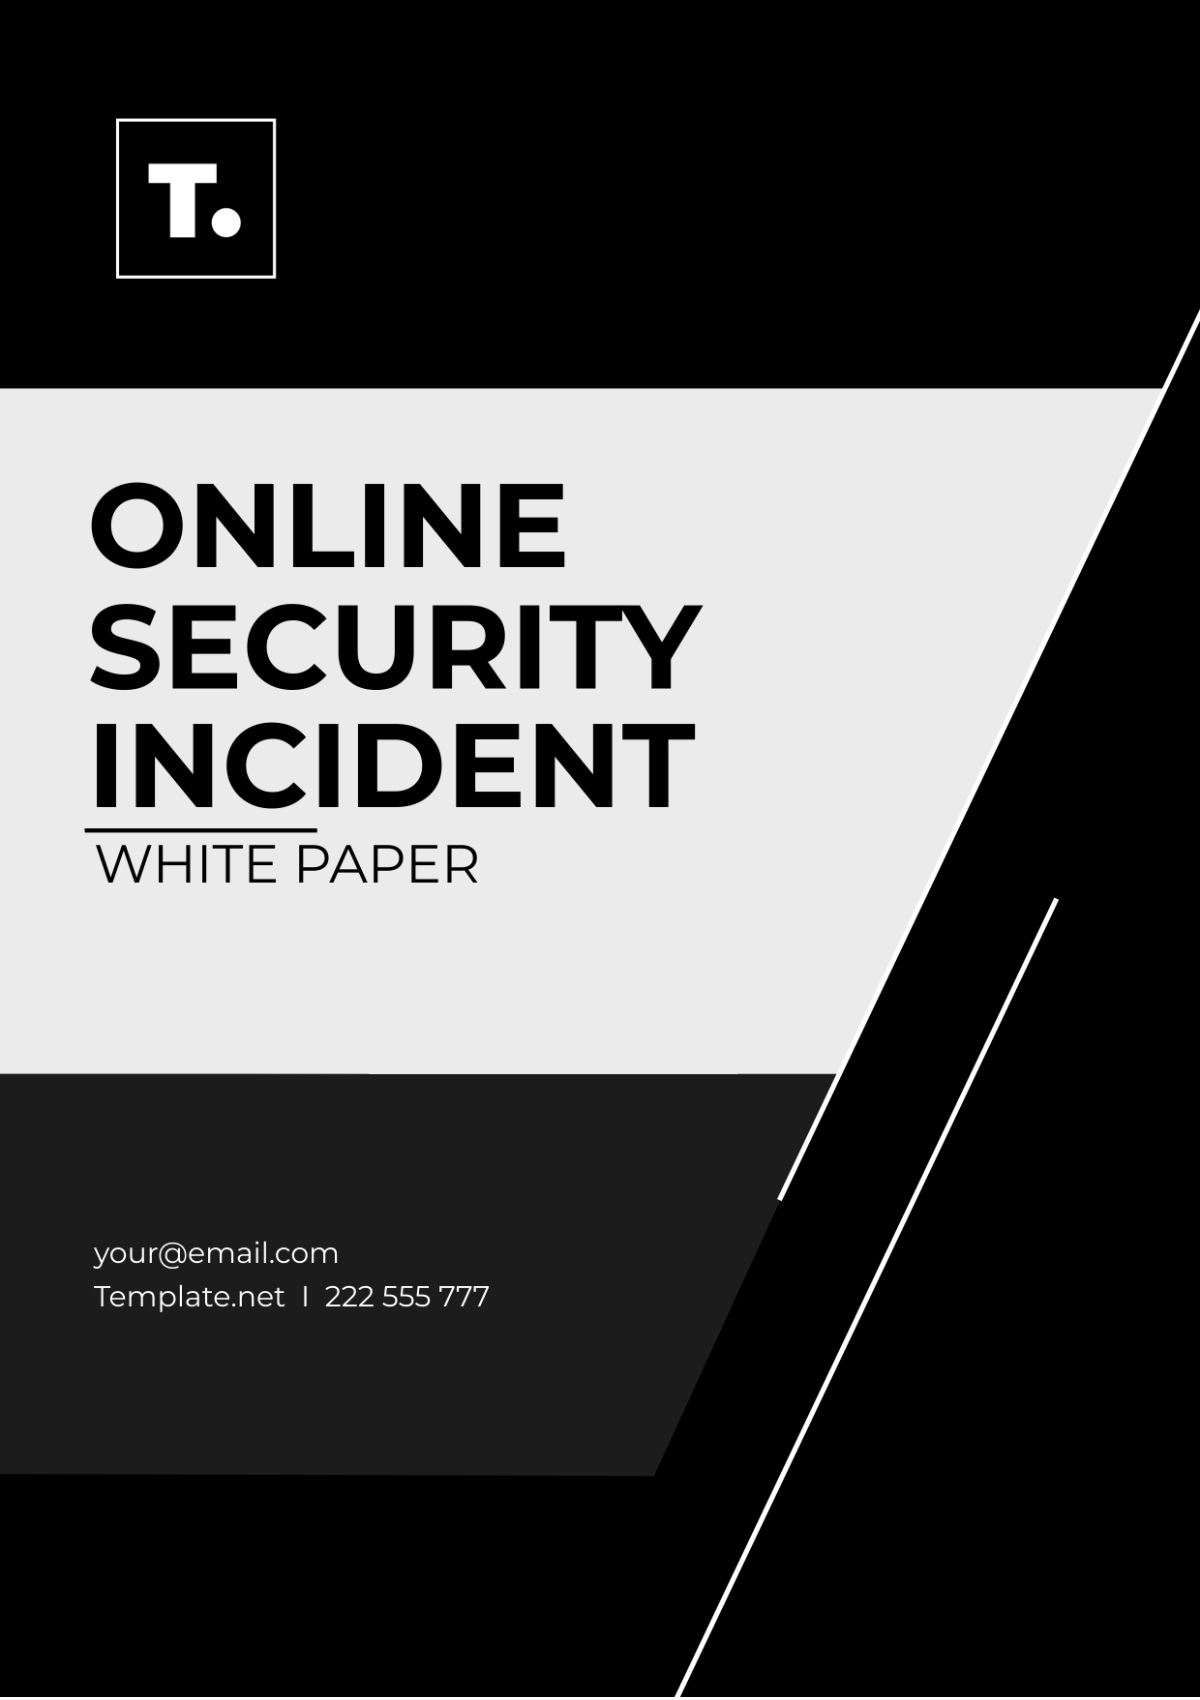 Free Online Security Incident White Paper Template